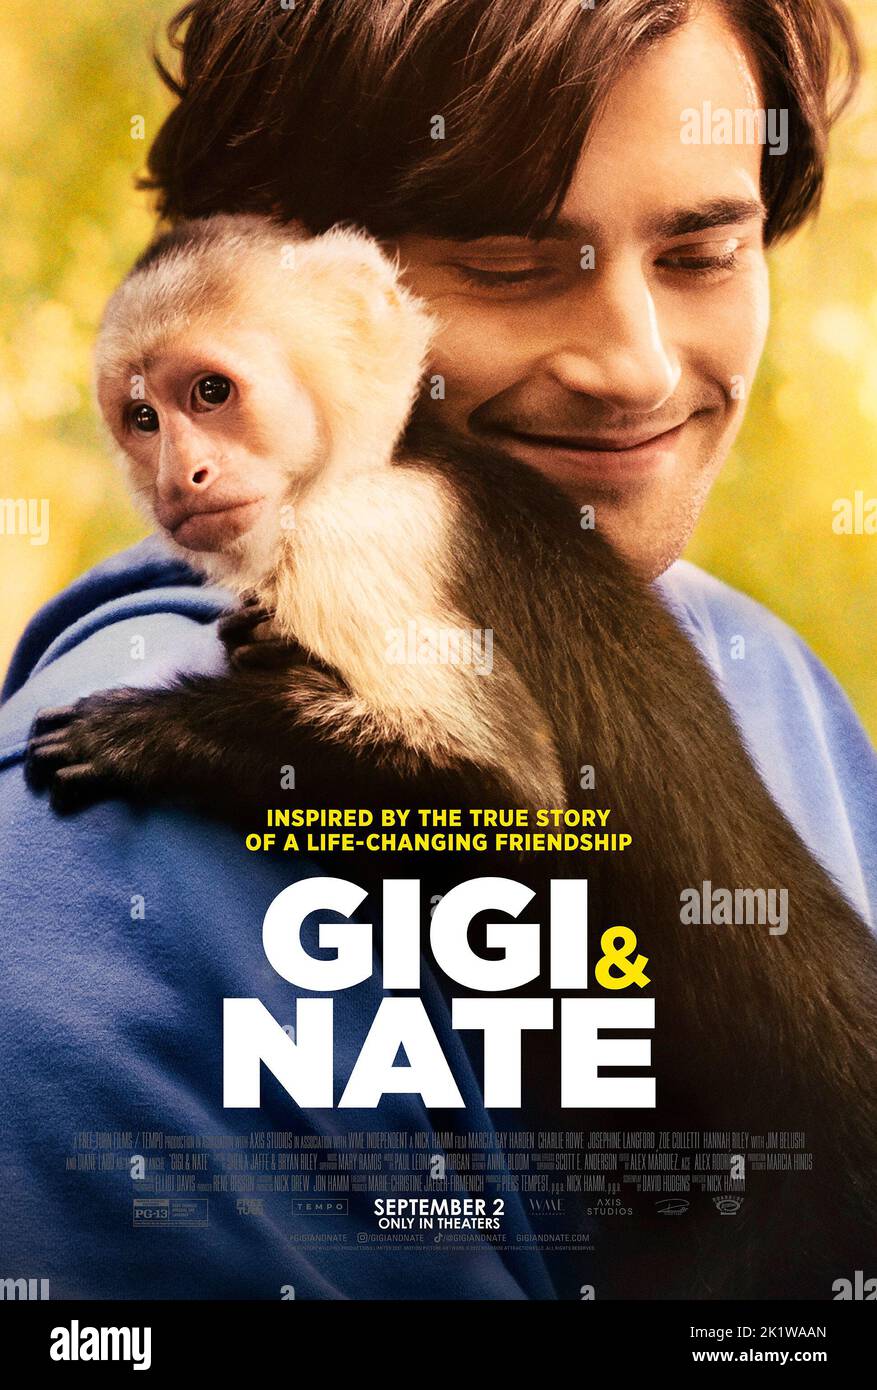 RELEASE DATE: September 2, 2022 TITLE: Gigi & Nate. STUDIO: Roadside Attractions. DIRECTOR: Nick Hamm. PLOT: A young man's life is turned upside down after he is left a quadriplegic. Moving forward seems near impossible until he meets his unlikely service animal, Gigi, a curious and intelligent capuchin monkey. STARRING: CHARLIE ROWE as Nate Gibson, poster art. (Credit Image: © Roadside Attractions/Entertainment Pictures) Stock Photo